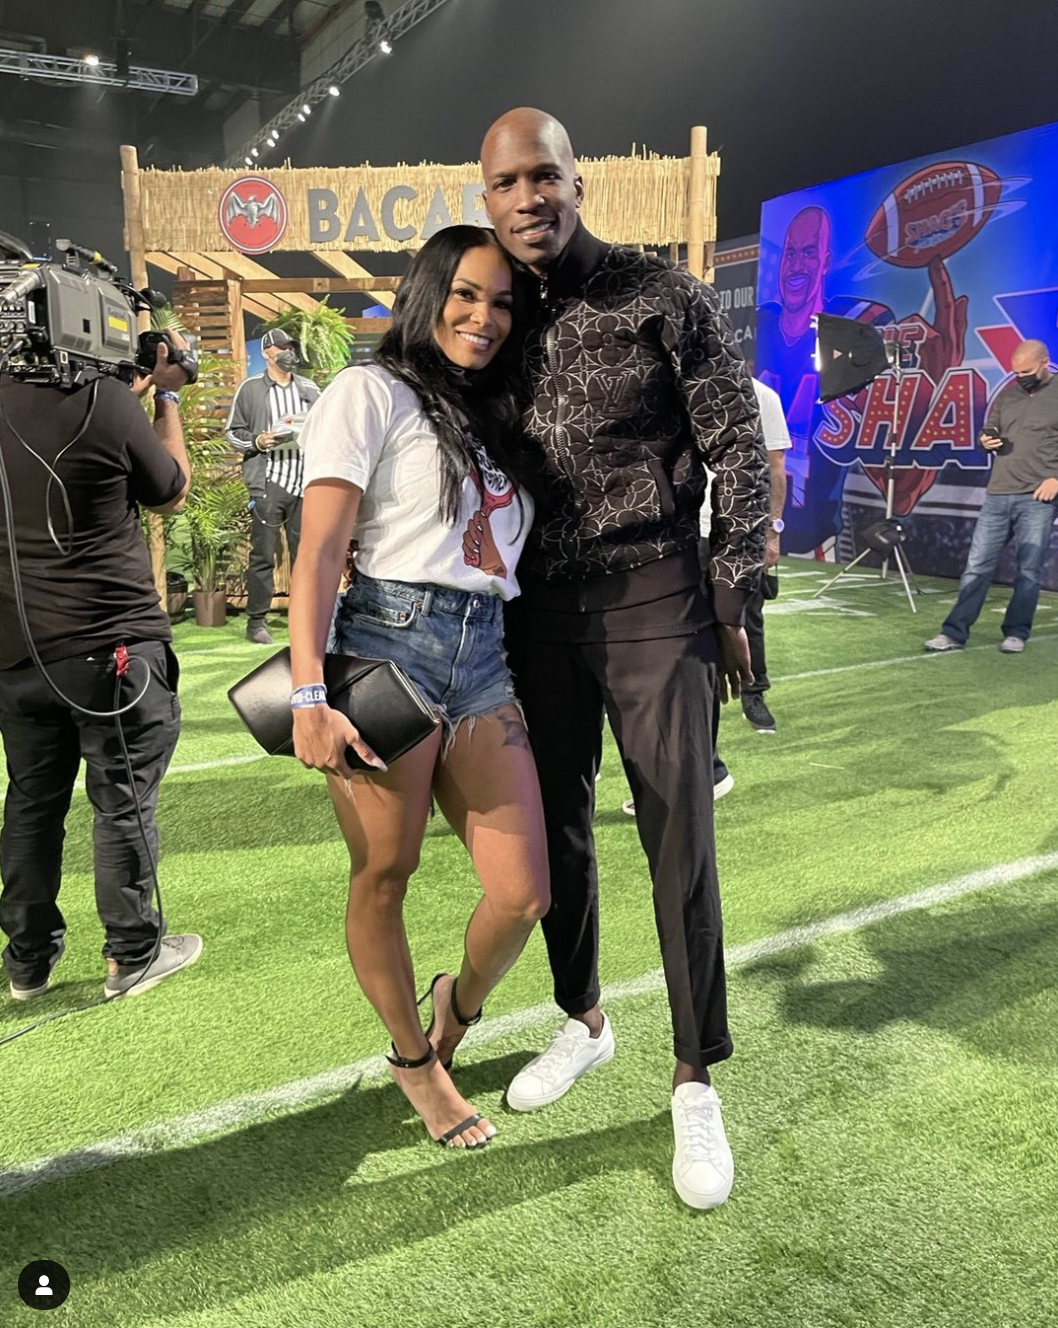 Who Is Ochocinco Dating? All You Need To Know!